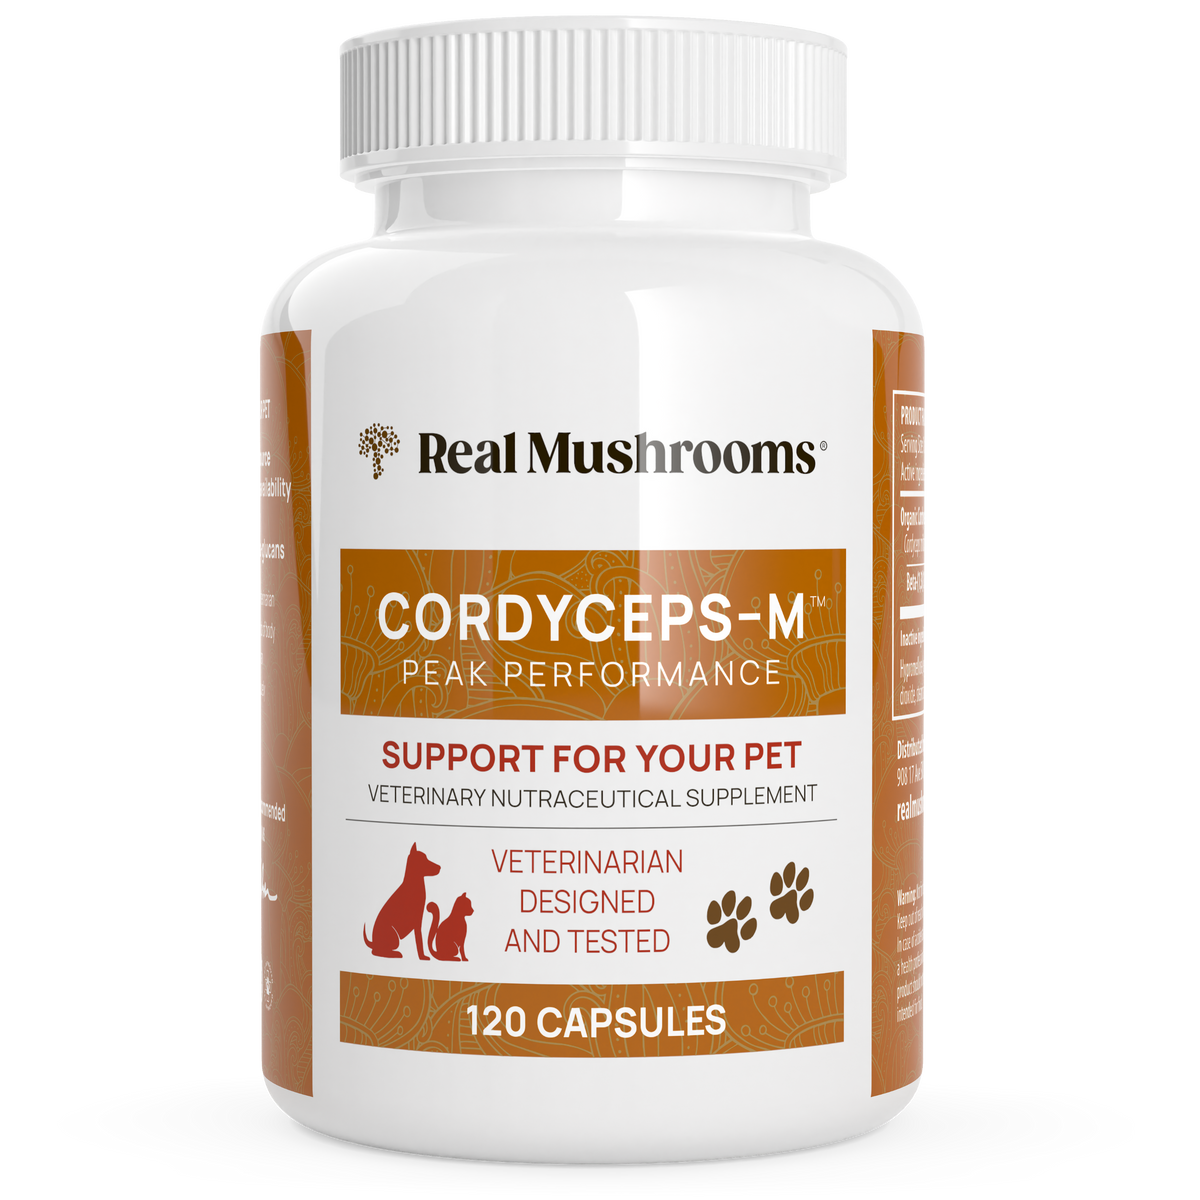 Organic Cordyceps Extract Capsules for Pets by Real Mushrooms